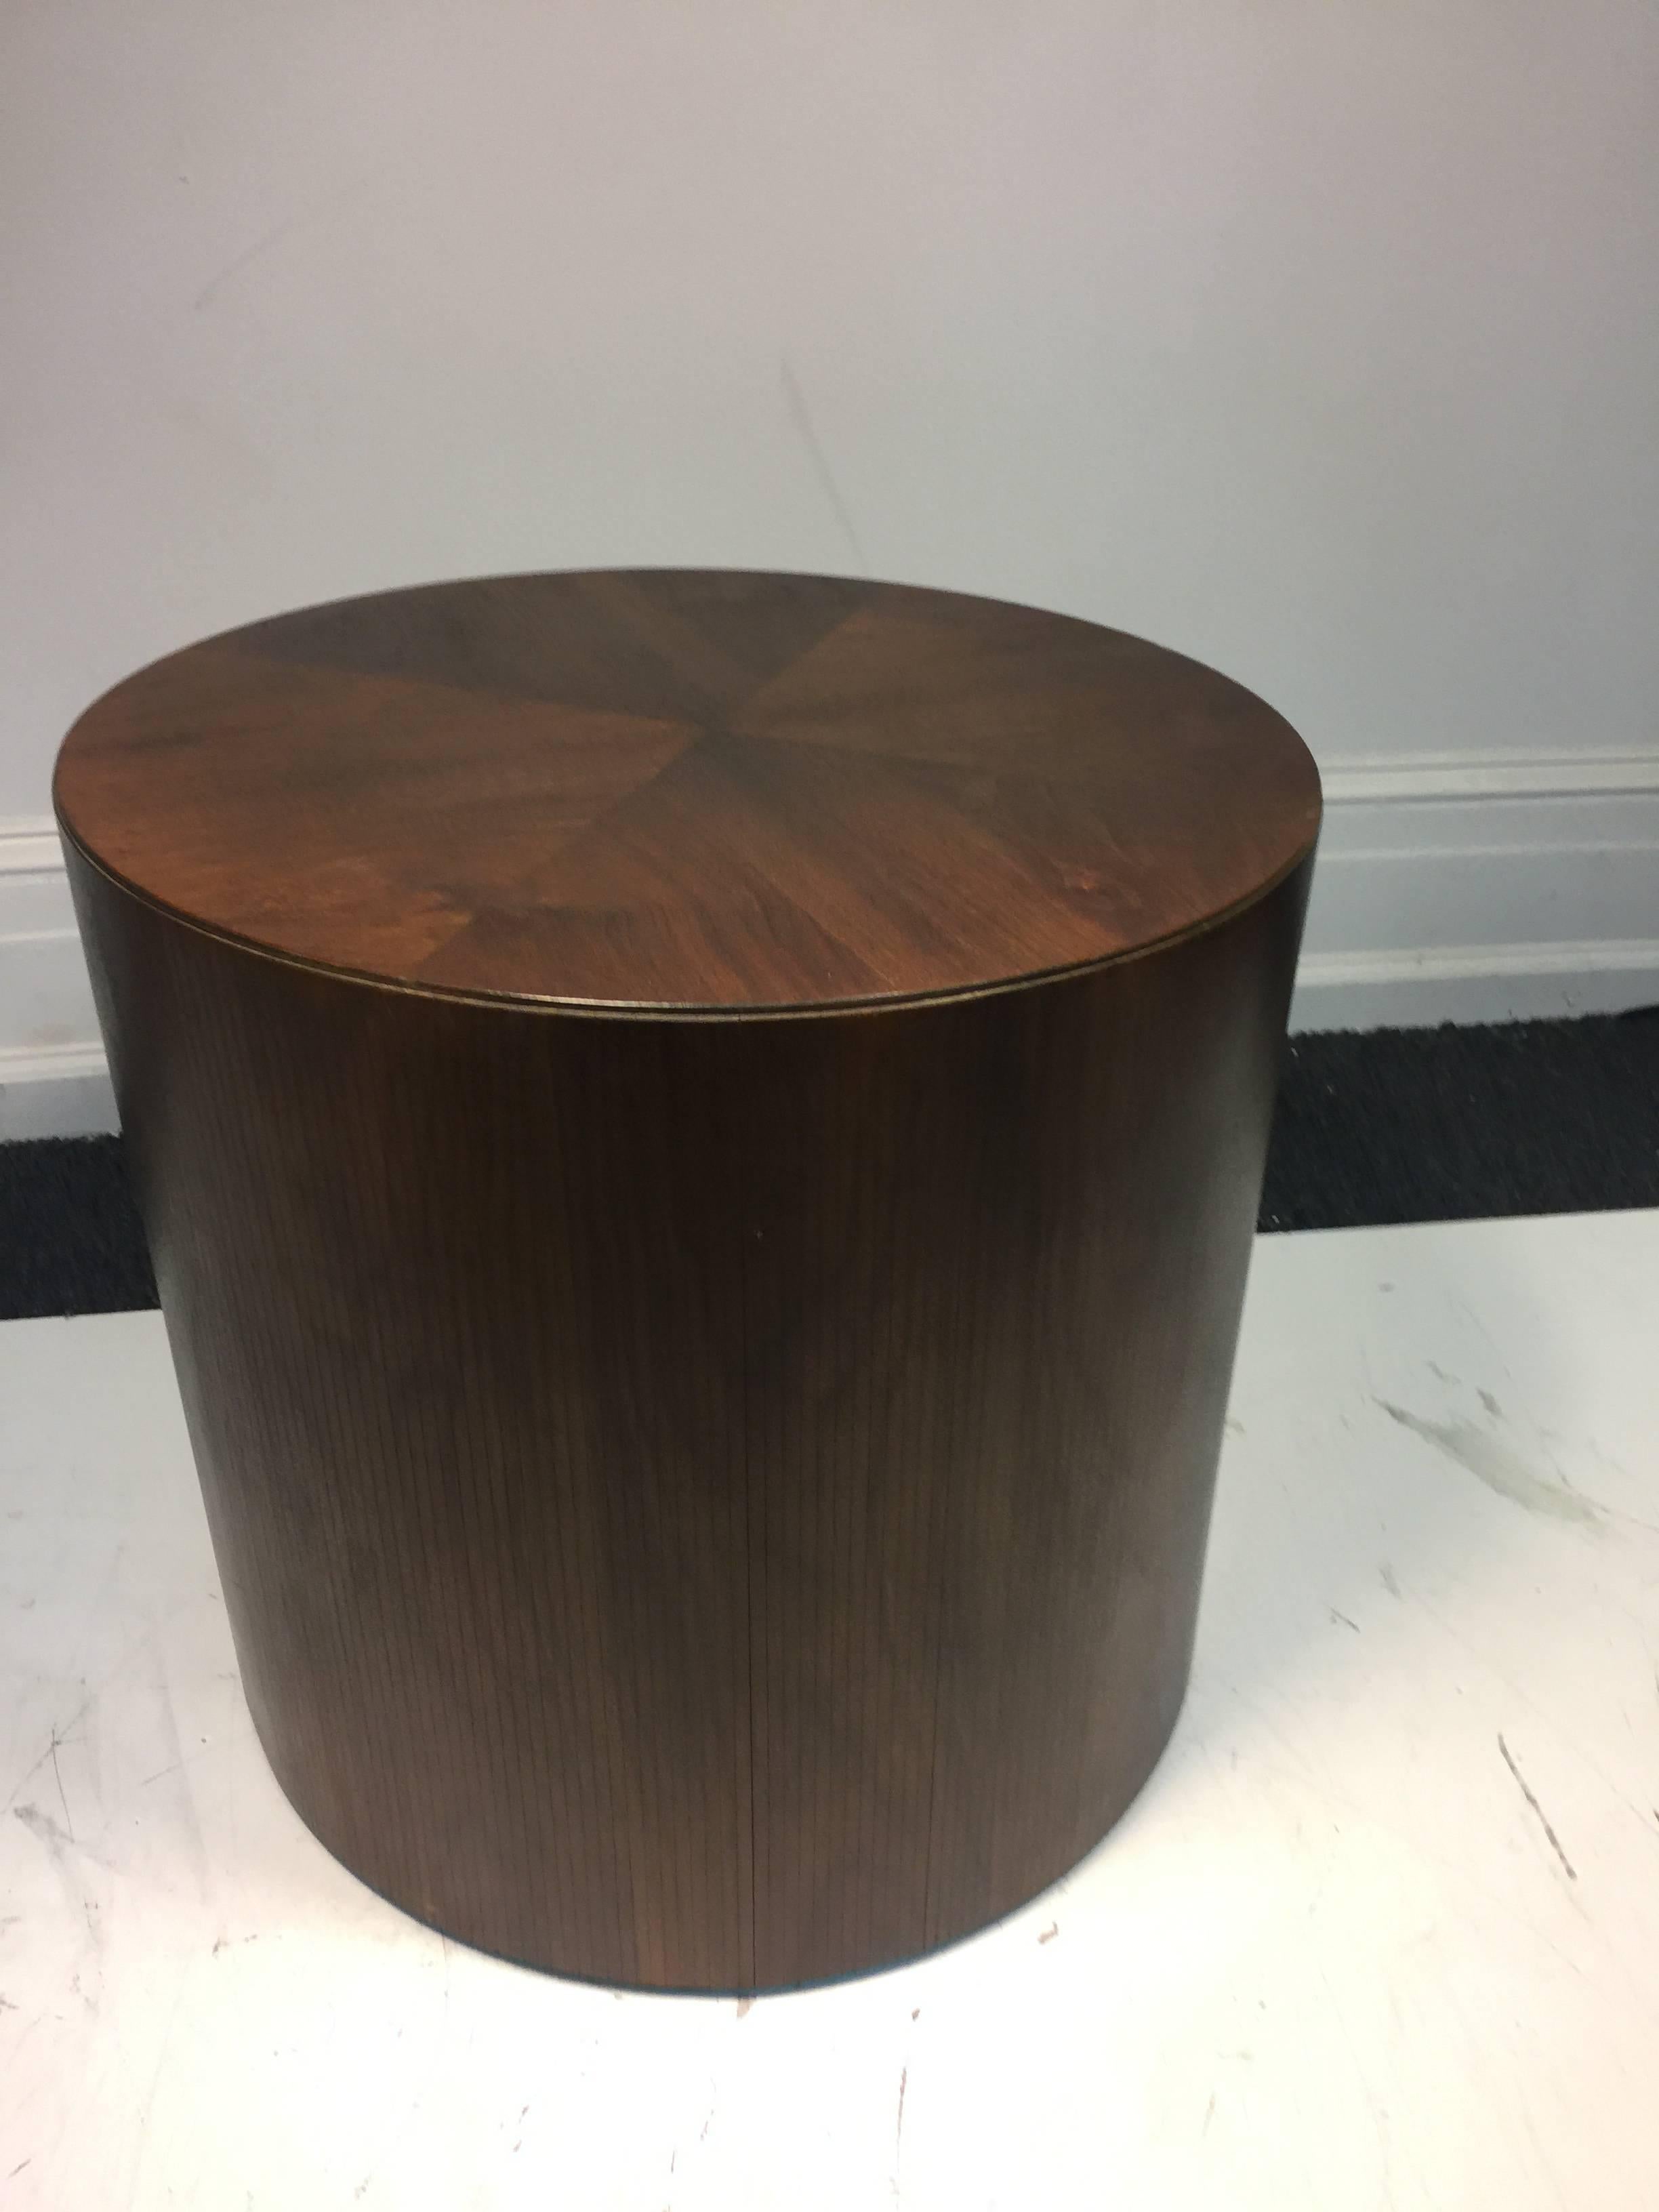 A substantial walnut drum table or pedestal by Lane, circa 1970. This versatile, cylindrical piece can be used as a side table or end table. Add glass and you have a coffee table. Good condition with age appropriate wear.